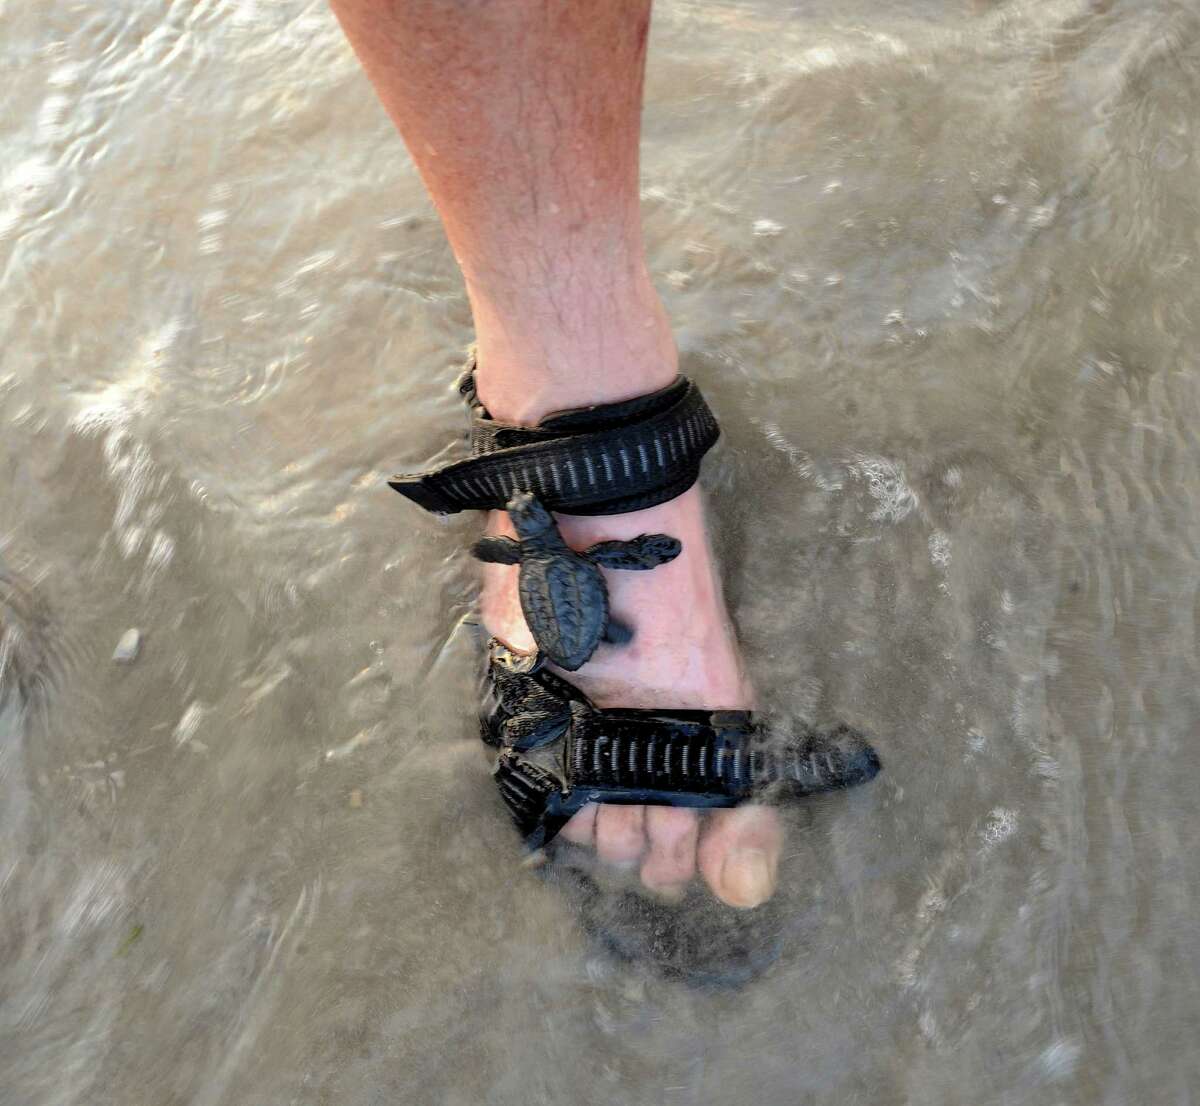 A Kemp's ridley sea turtle hatchling crawls onto the foot of photographer Billy Calzada during a release of hatchlings at Padre Island National Seashore on Thursday, June 28, 2012.